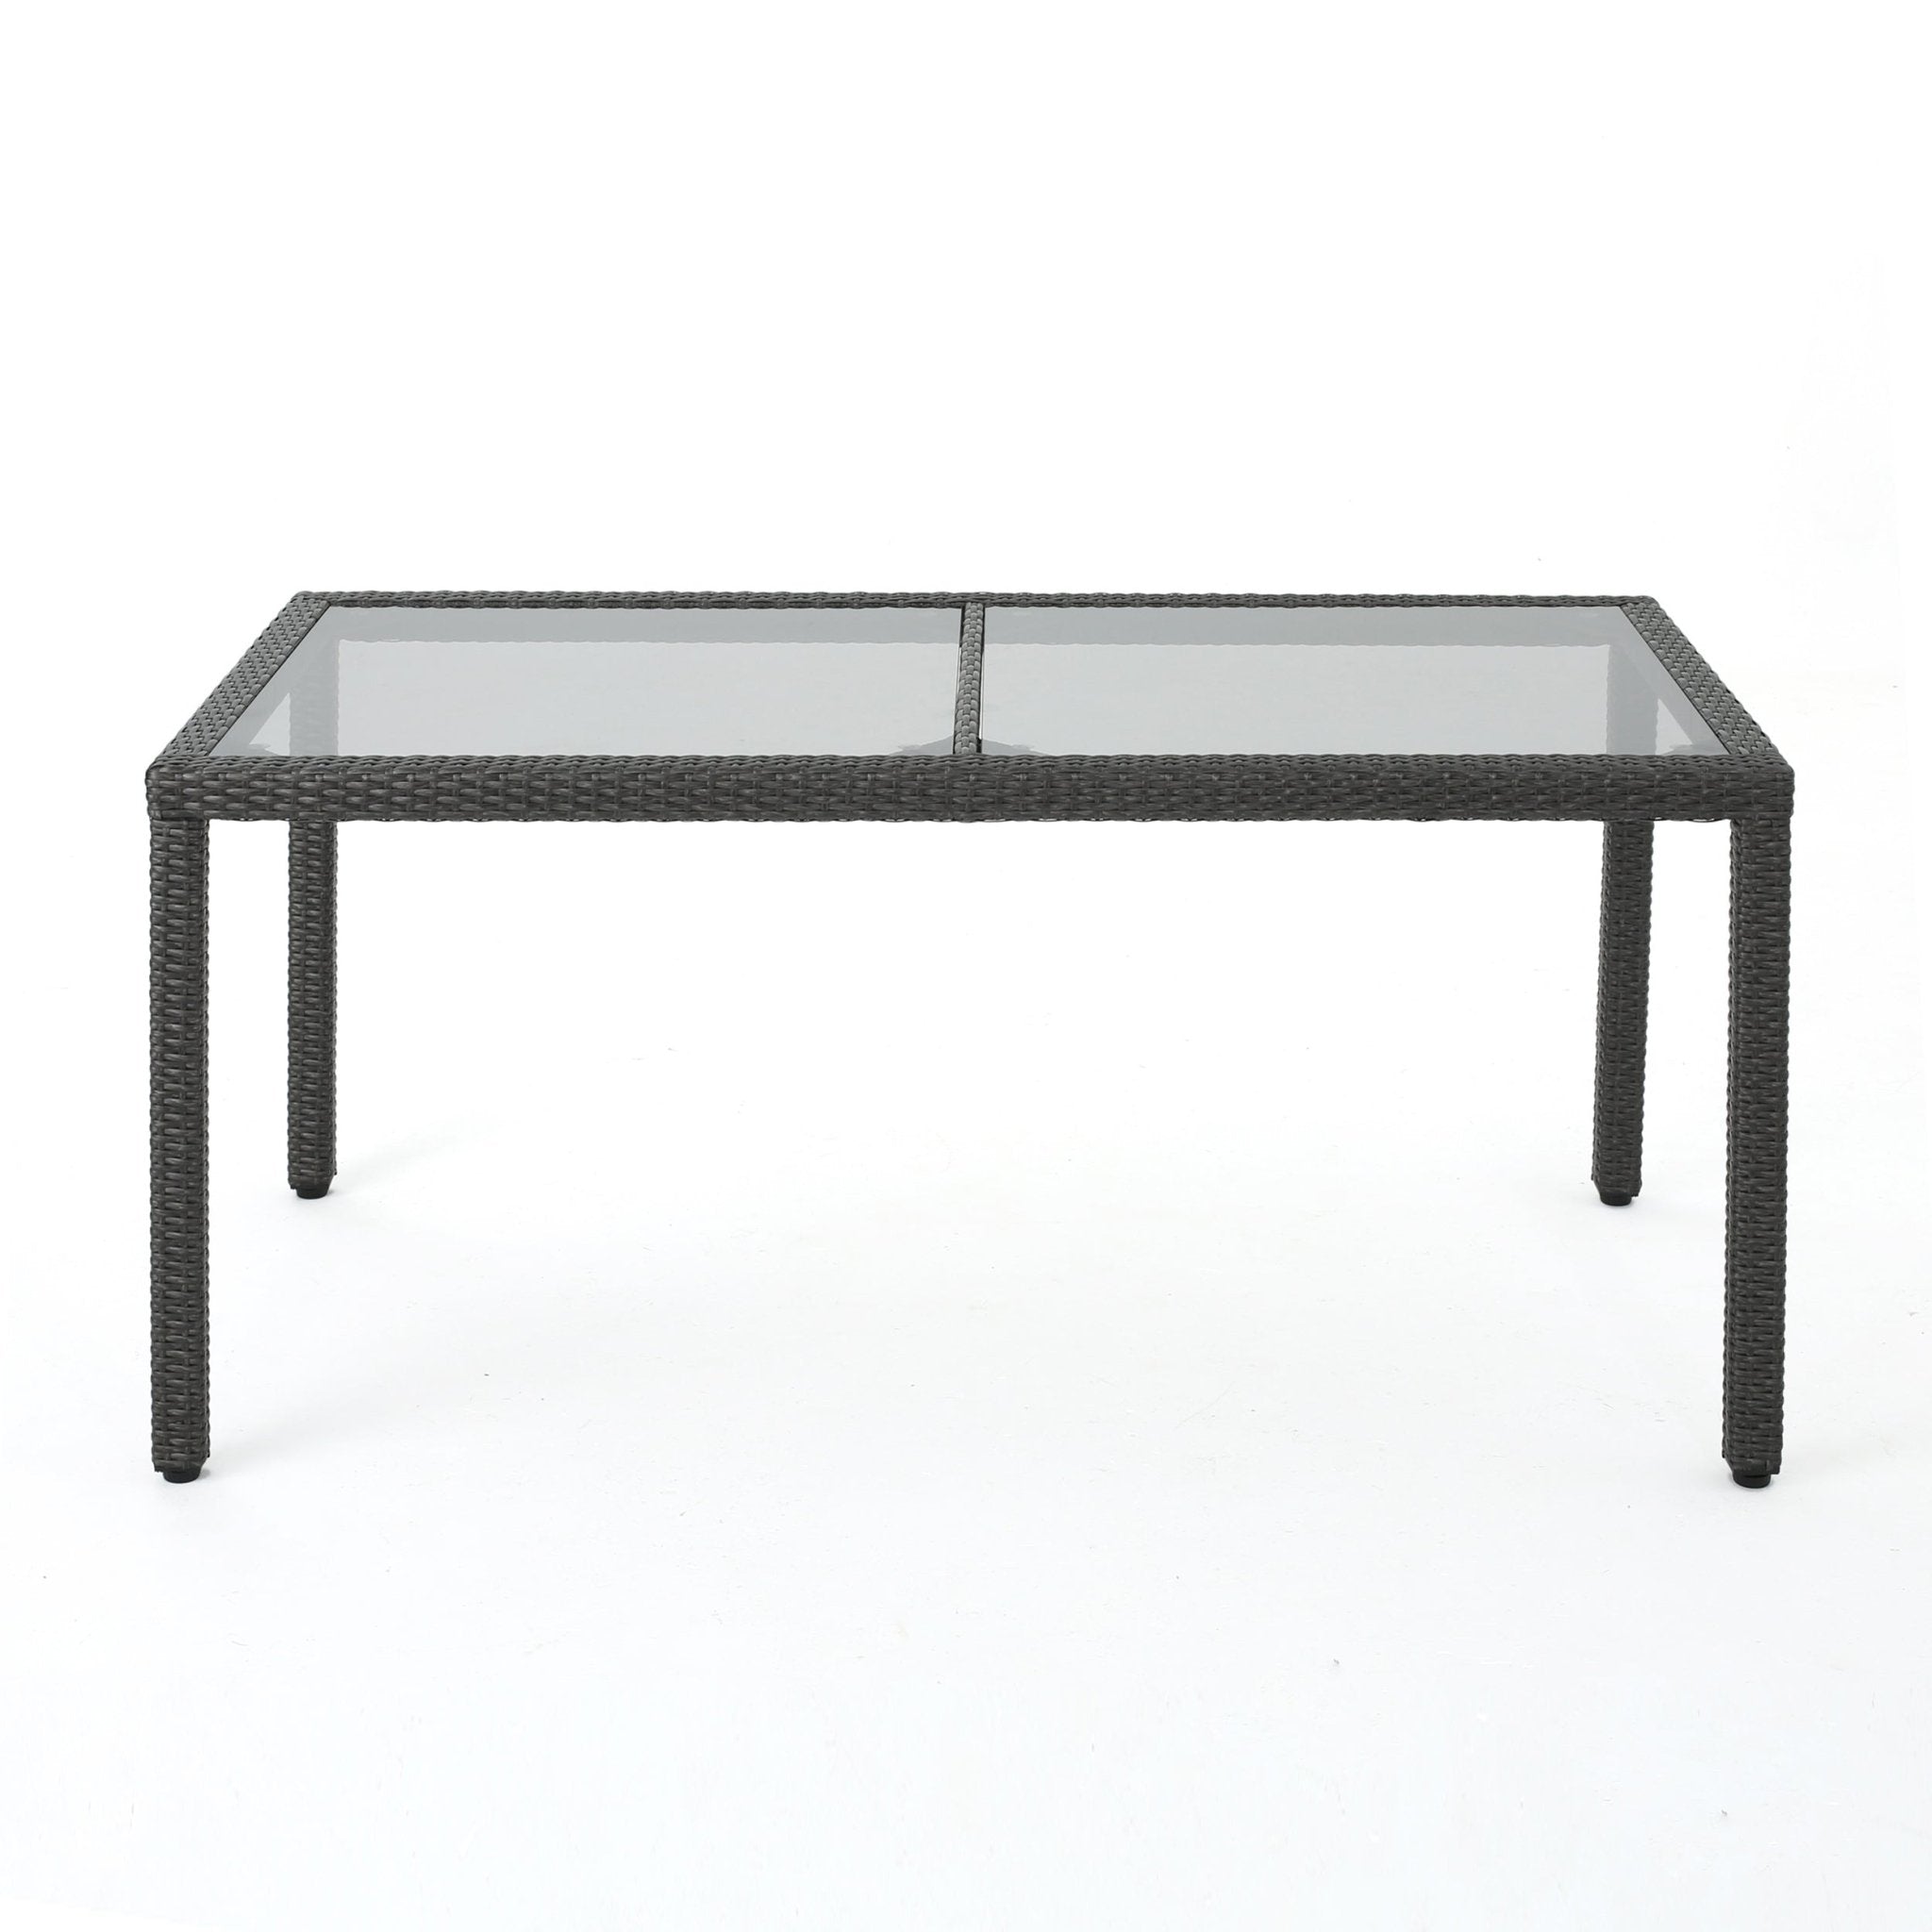 Velveteen Outdoor Dining Table with Rattan Cover and Darkened Glass Top Table - Outdoor Tables